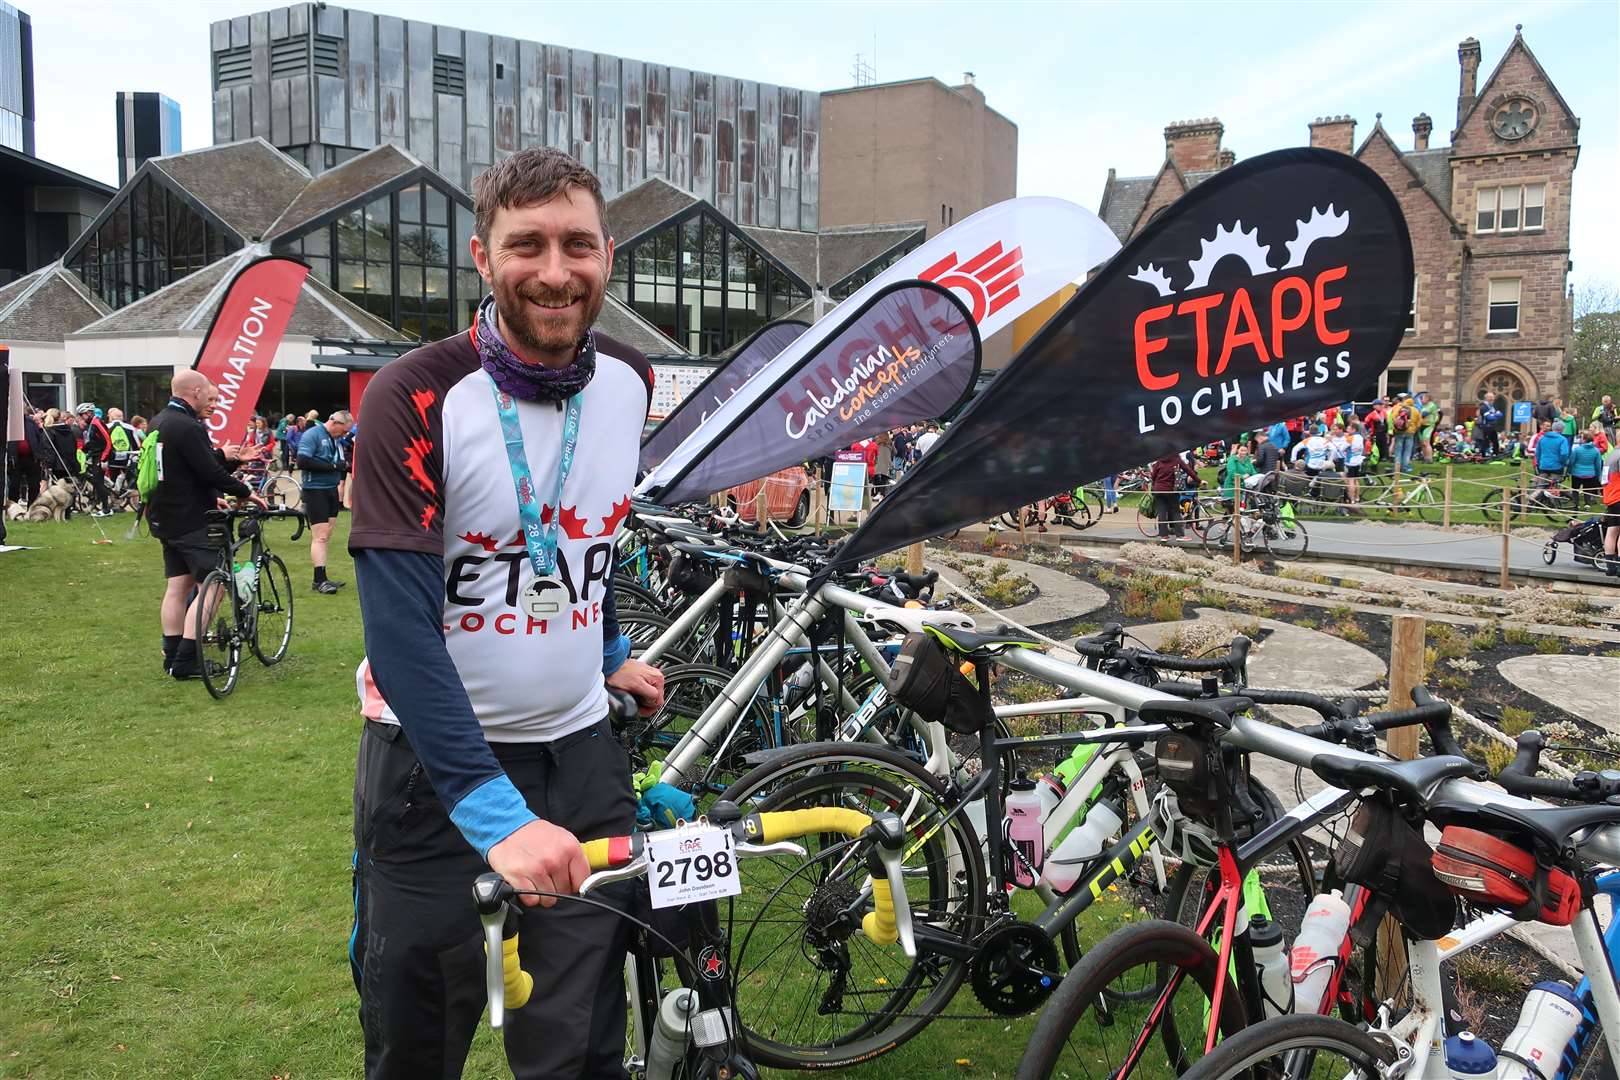 John with his medal after completing the 2019 Etape Loch Ness.